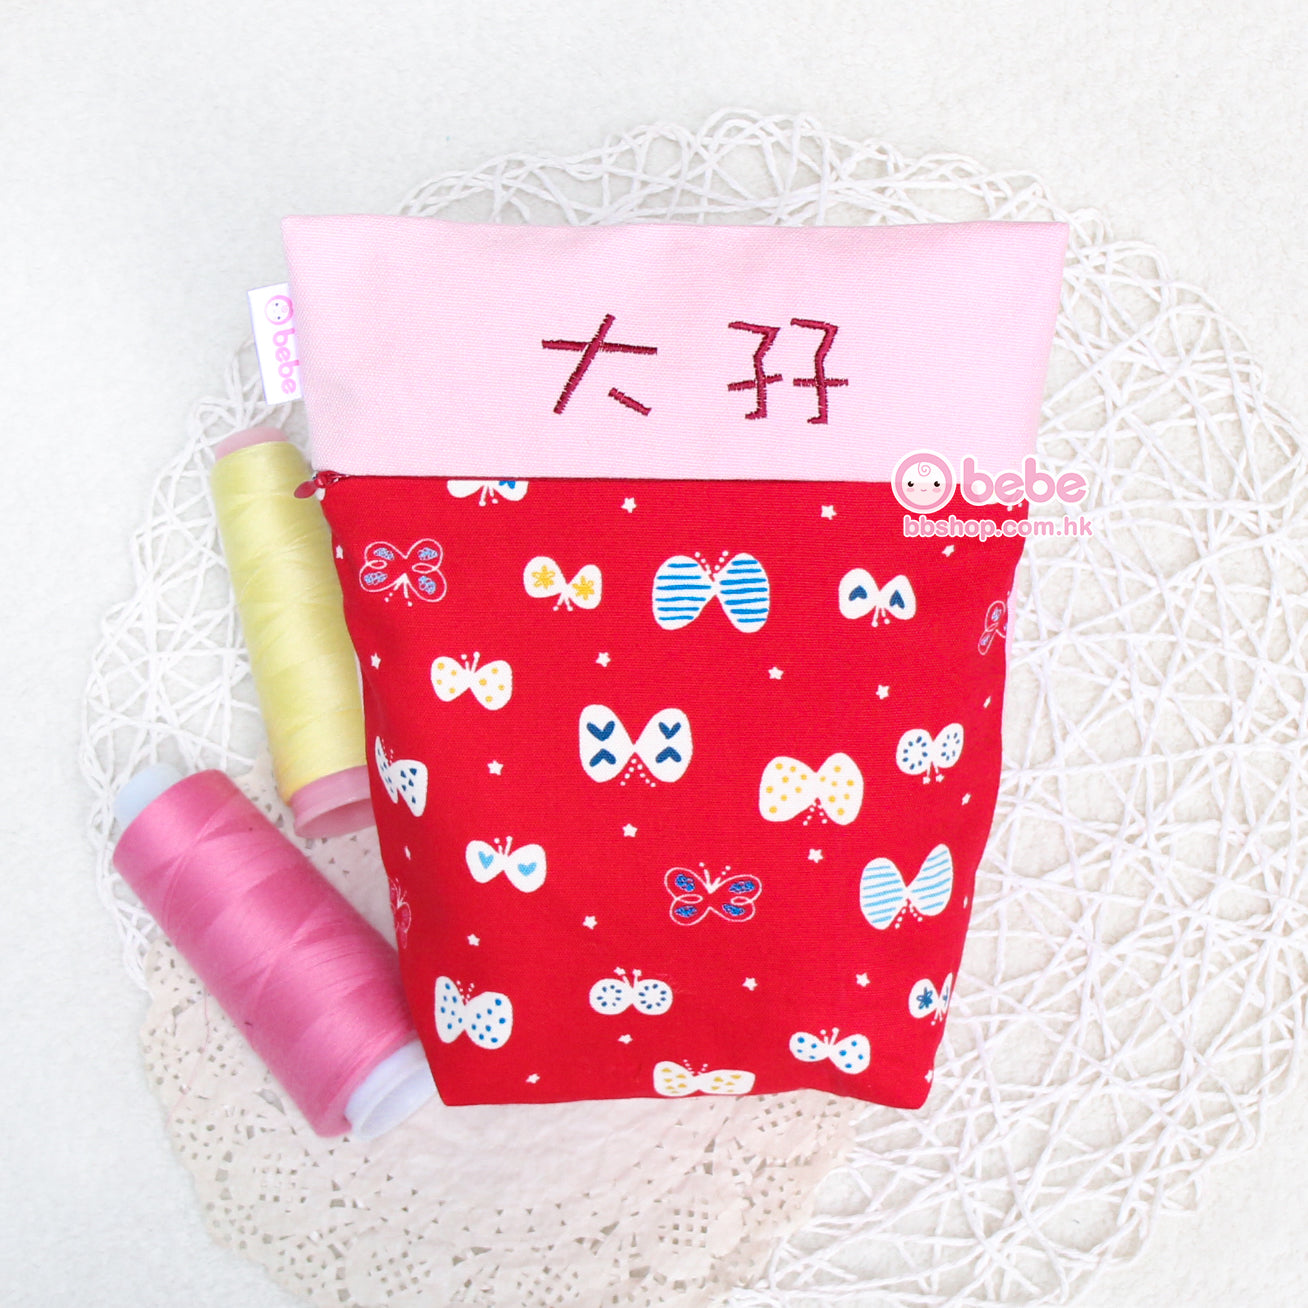 HEB251 紅色蝴蝶結繡名紙尿片袋 Red Rabbit Personalized Diaper Pouch